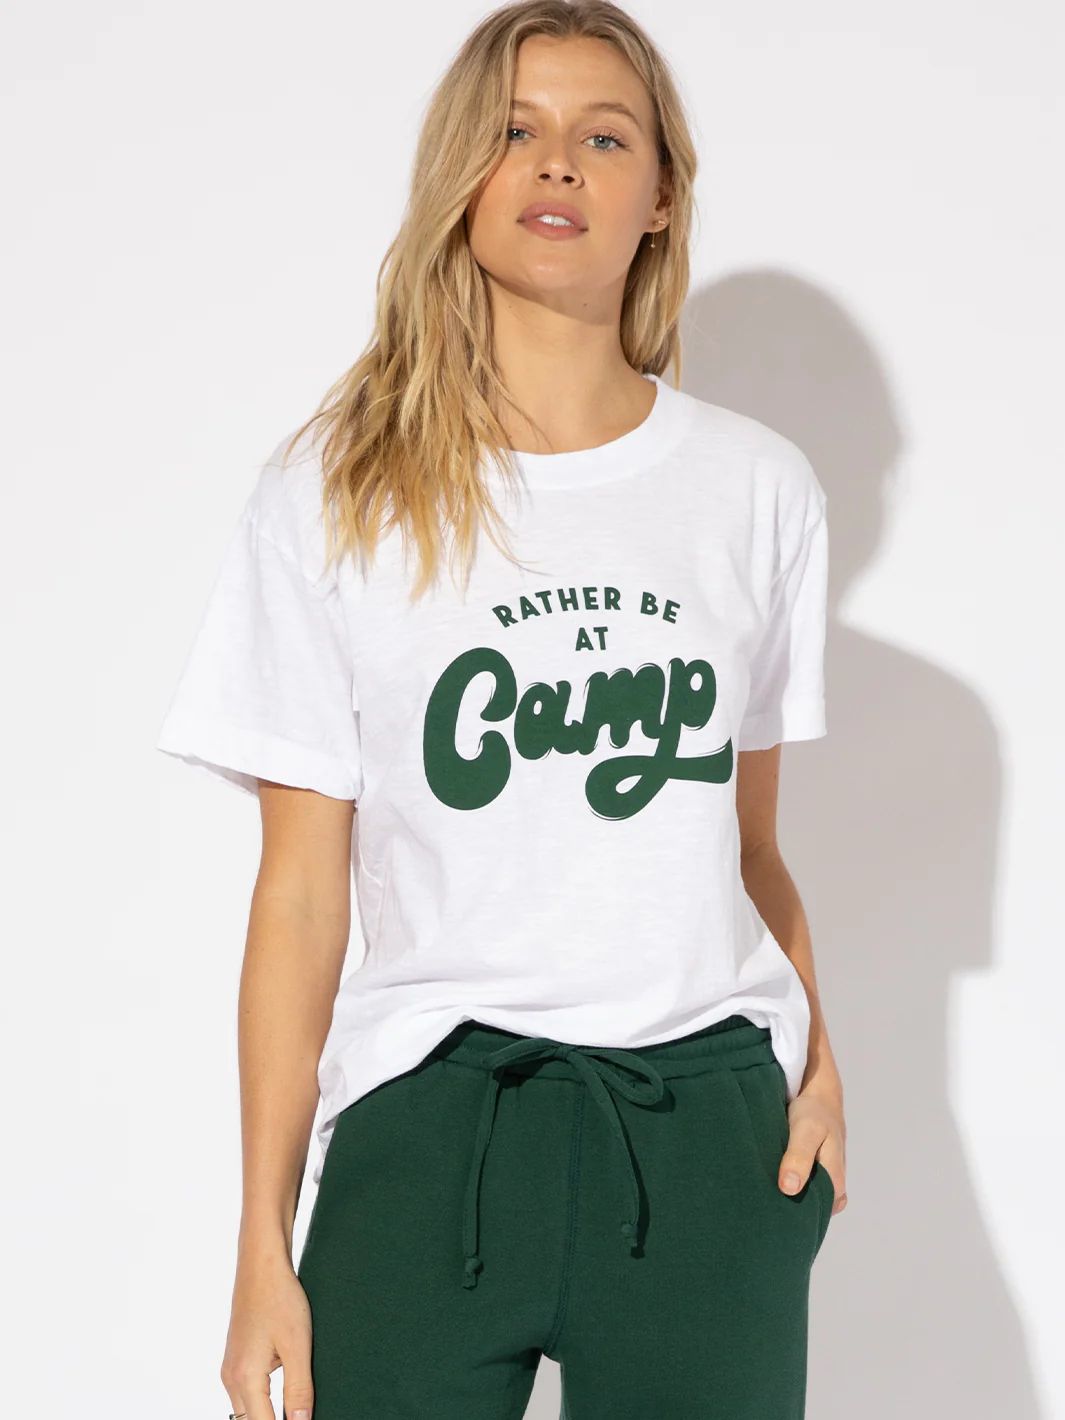 Sub_Urban Riot Women's Rather Be At Camp Slub Boyfriend Tee in Antique White Medium Lord & Taylor | Lord & Taylor